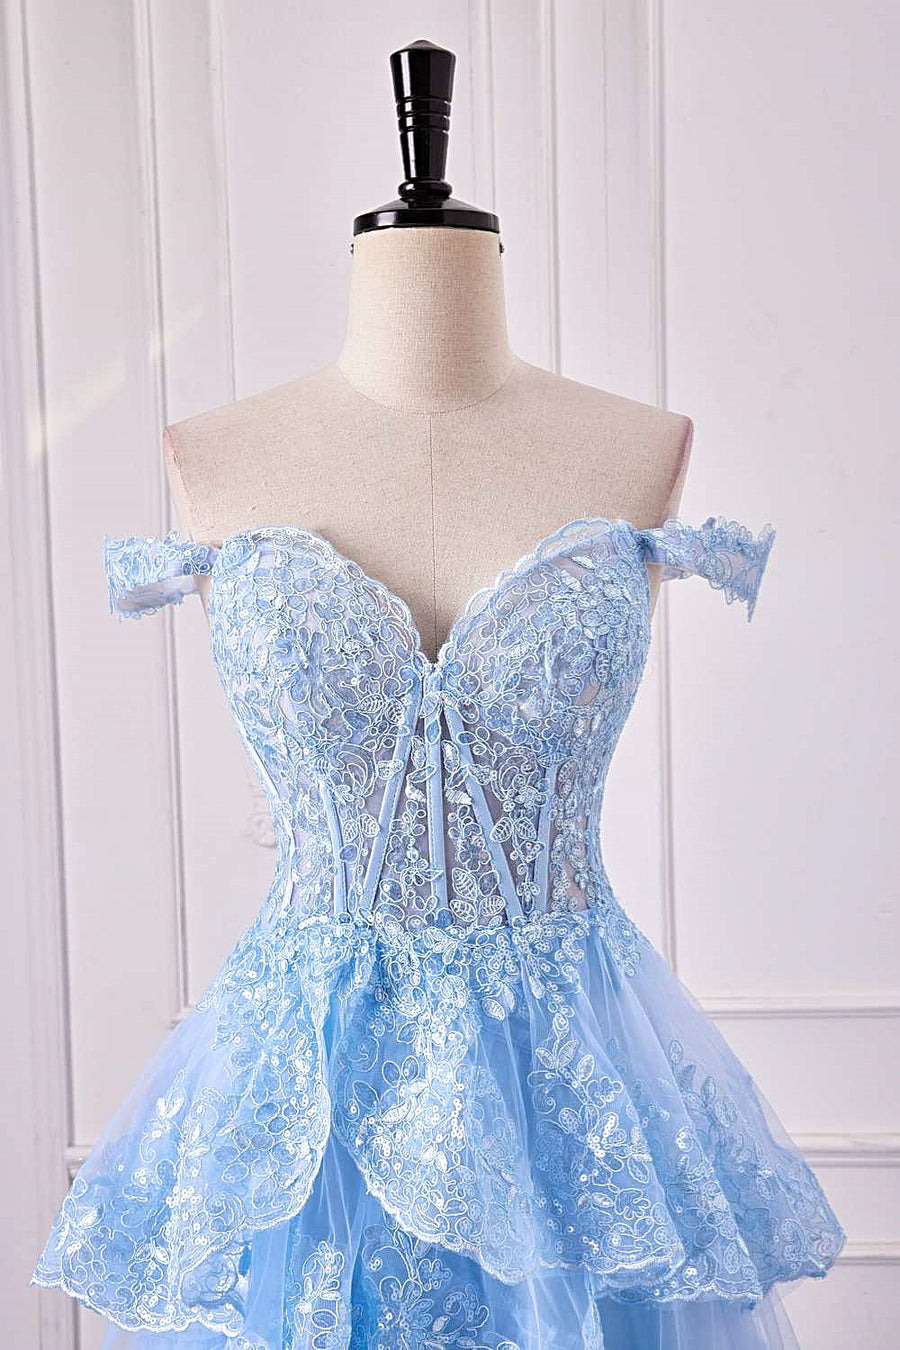 Light Blue Off-Shoulder Sequined Layers A-line Long Prom Dress with Slit